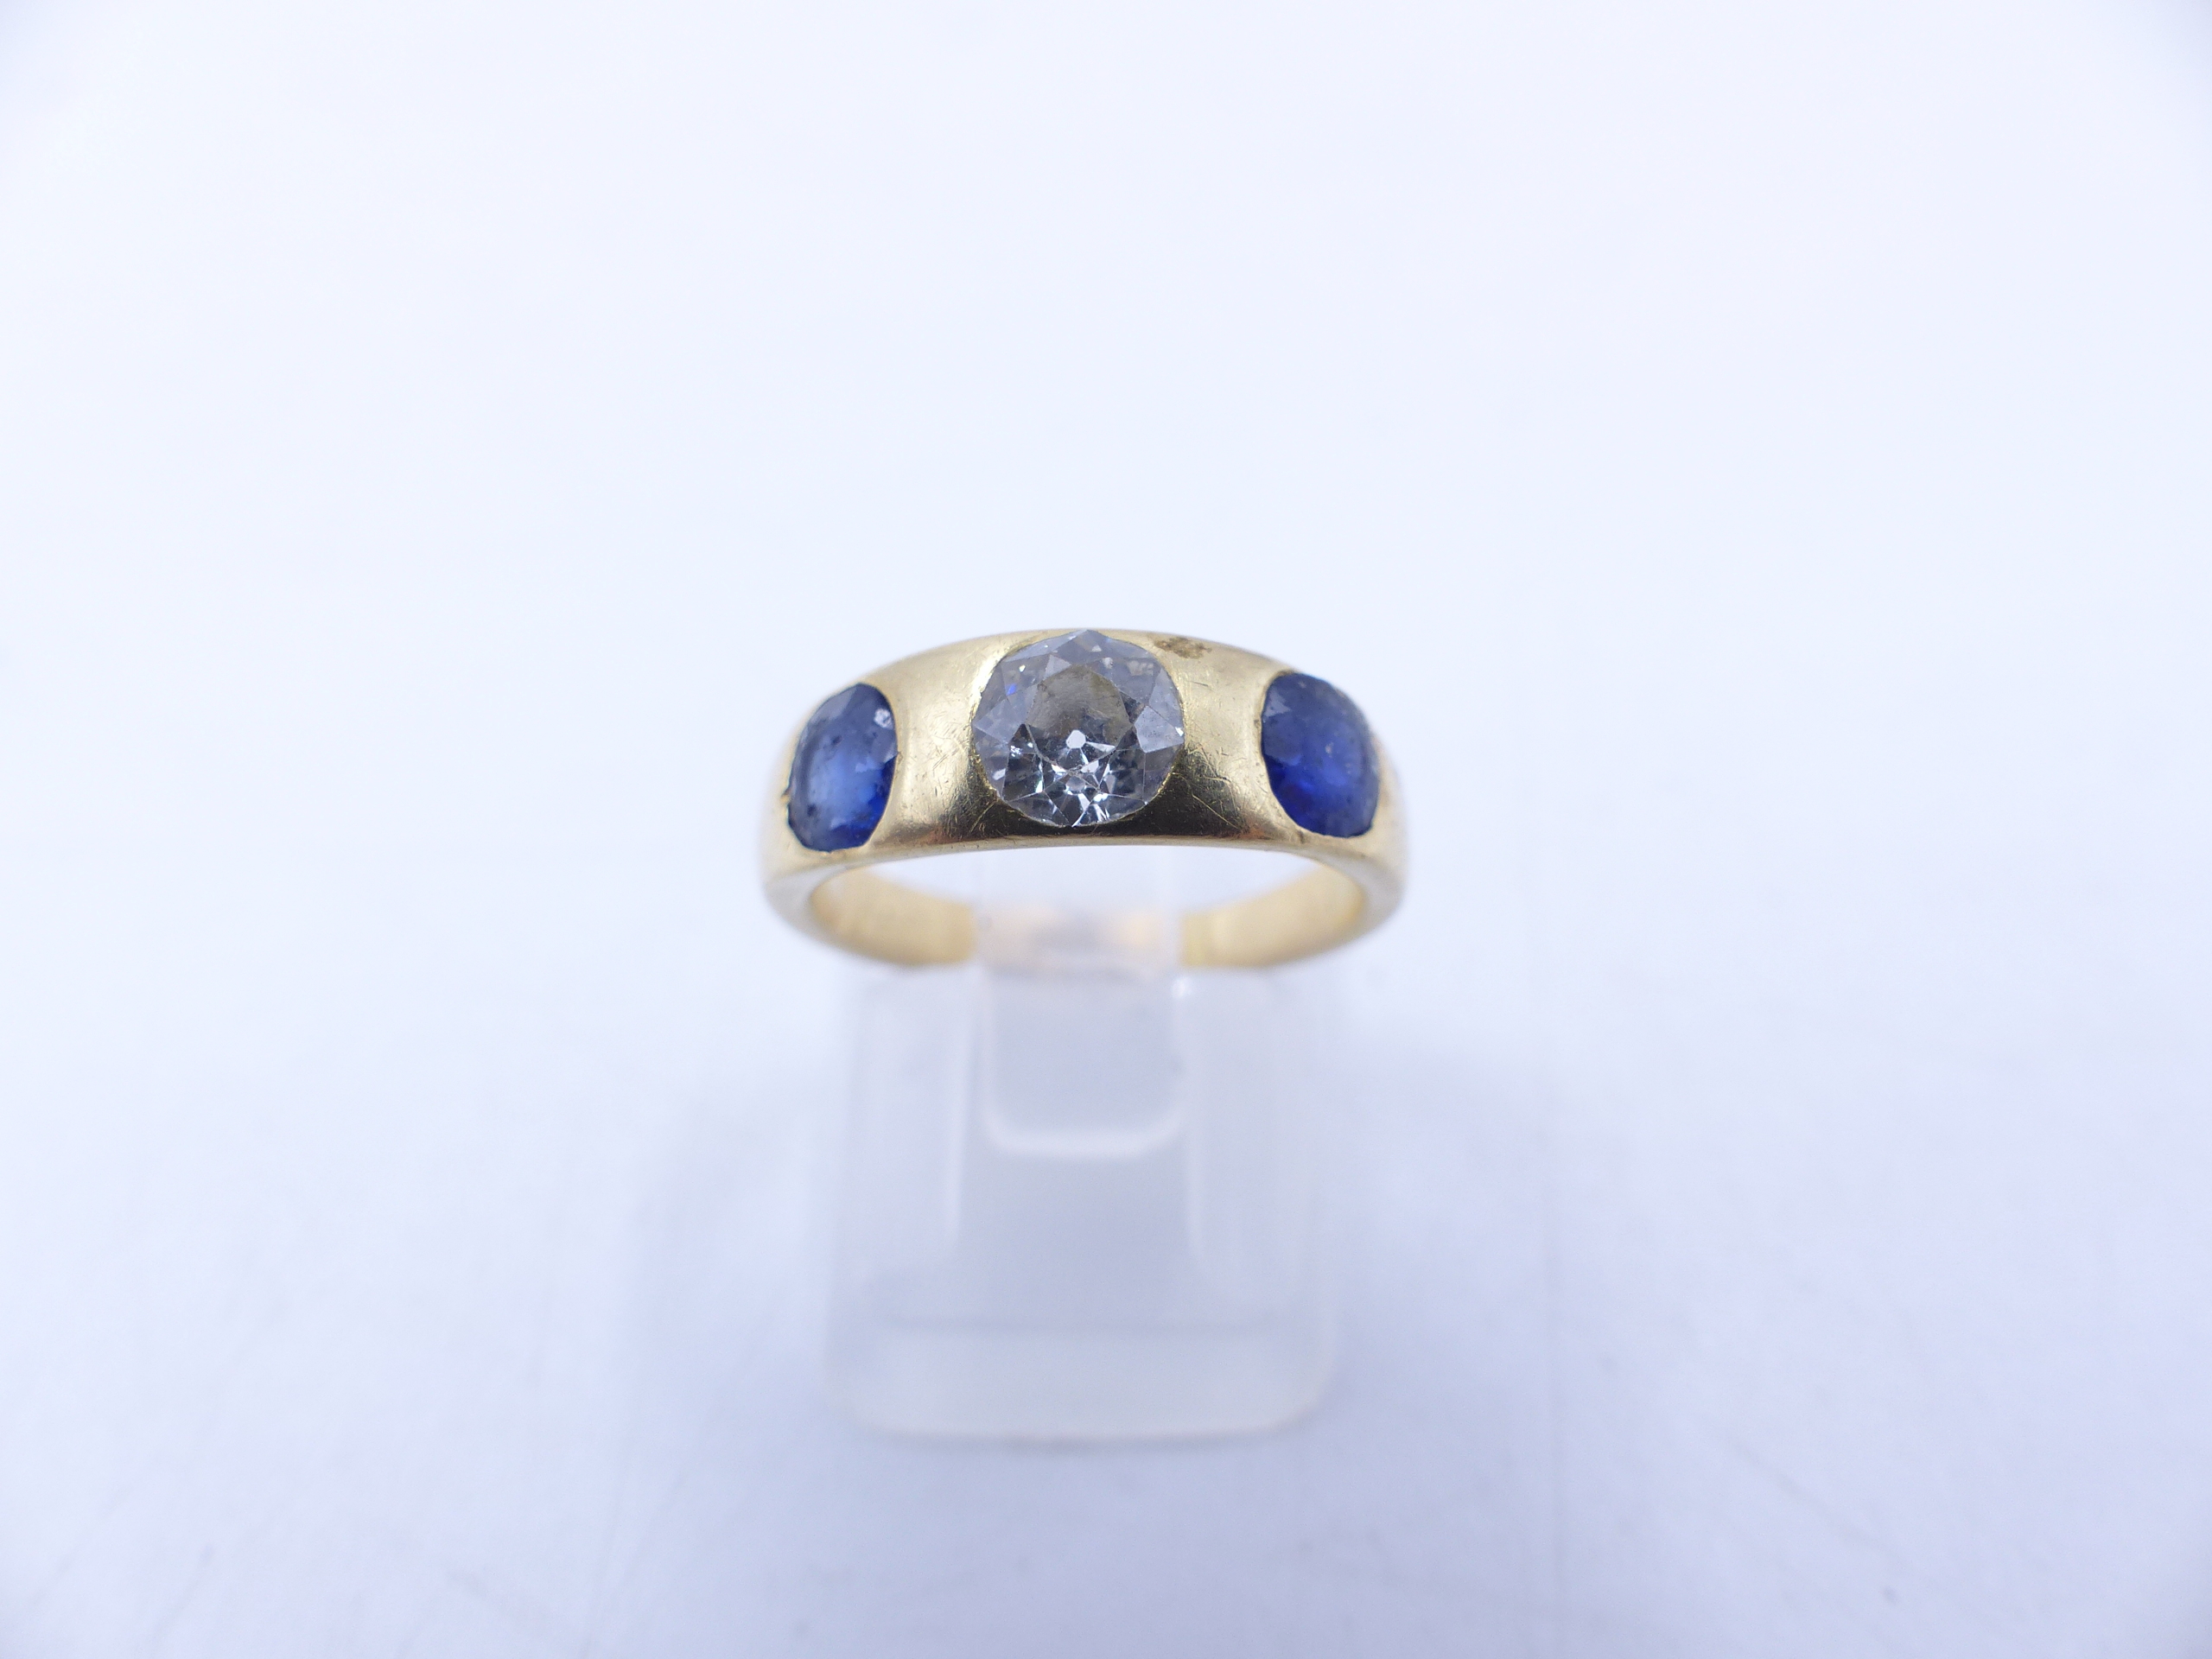 AN 18 STAMPED YELLOW GOLD SAPPHIRE AND DIAMOND THREE STONE TRADITIONAL GYPSY-SET RING. THE CENTRE